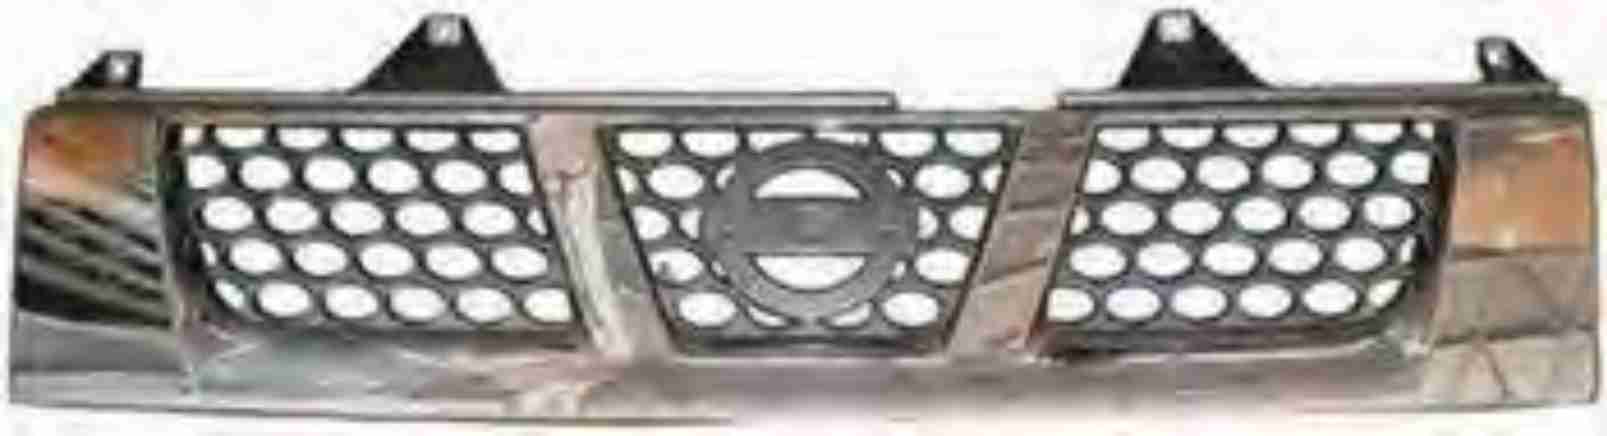 GRI502138 - FRONTIER 01-05 GRILLE CHROME & GREY ............2005759